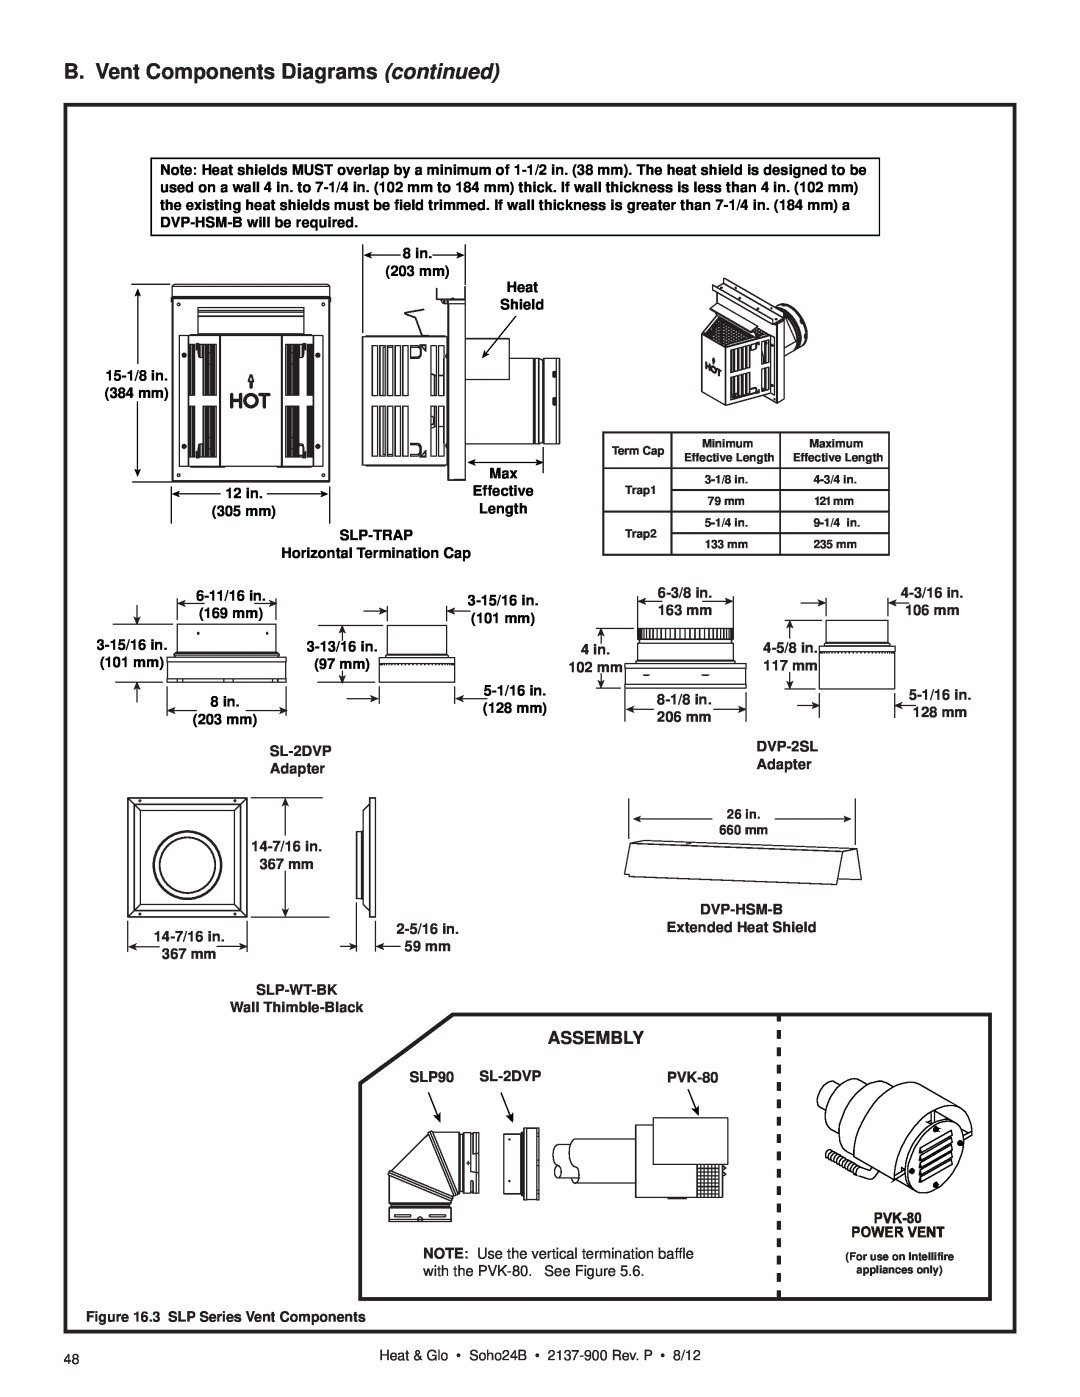 Heat & Glo LifeStyle 2137-900 B. Vent Components Diagrams continued, SL-2DVP Adapter, 4-5/8in 117 mm DVP-2SLAdapter 